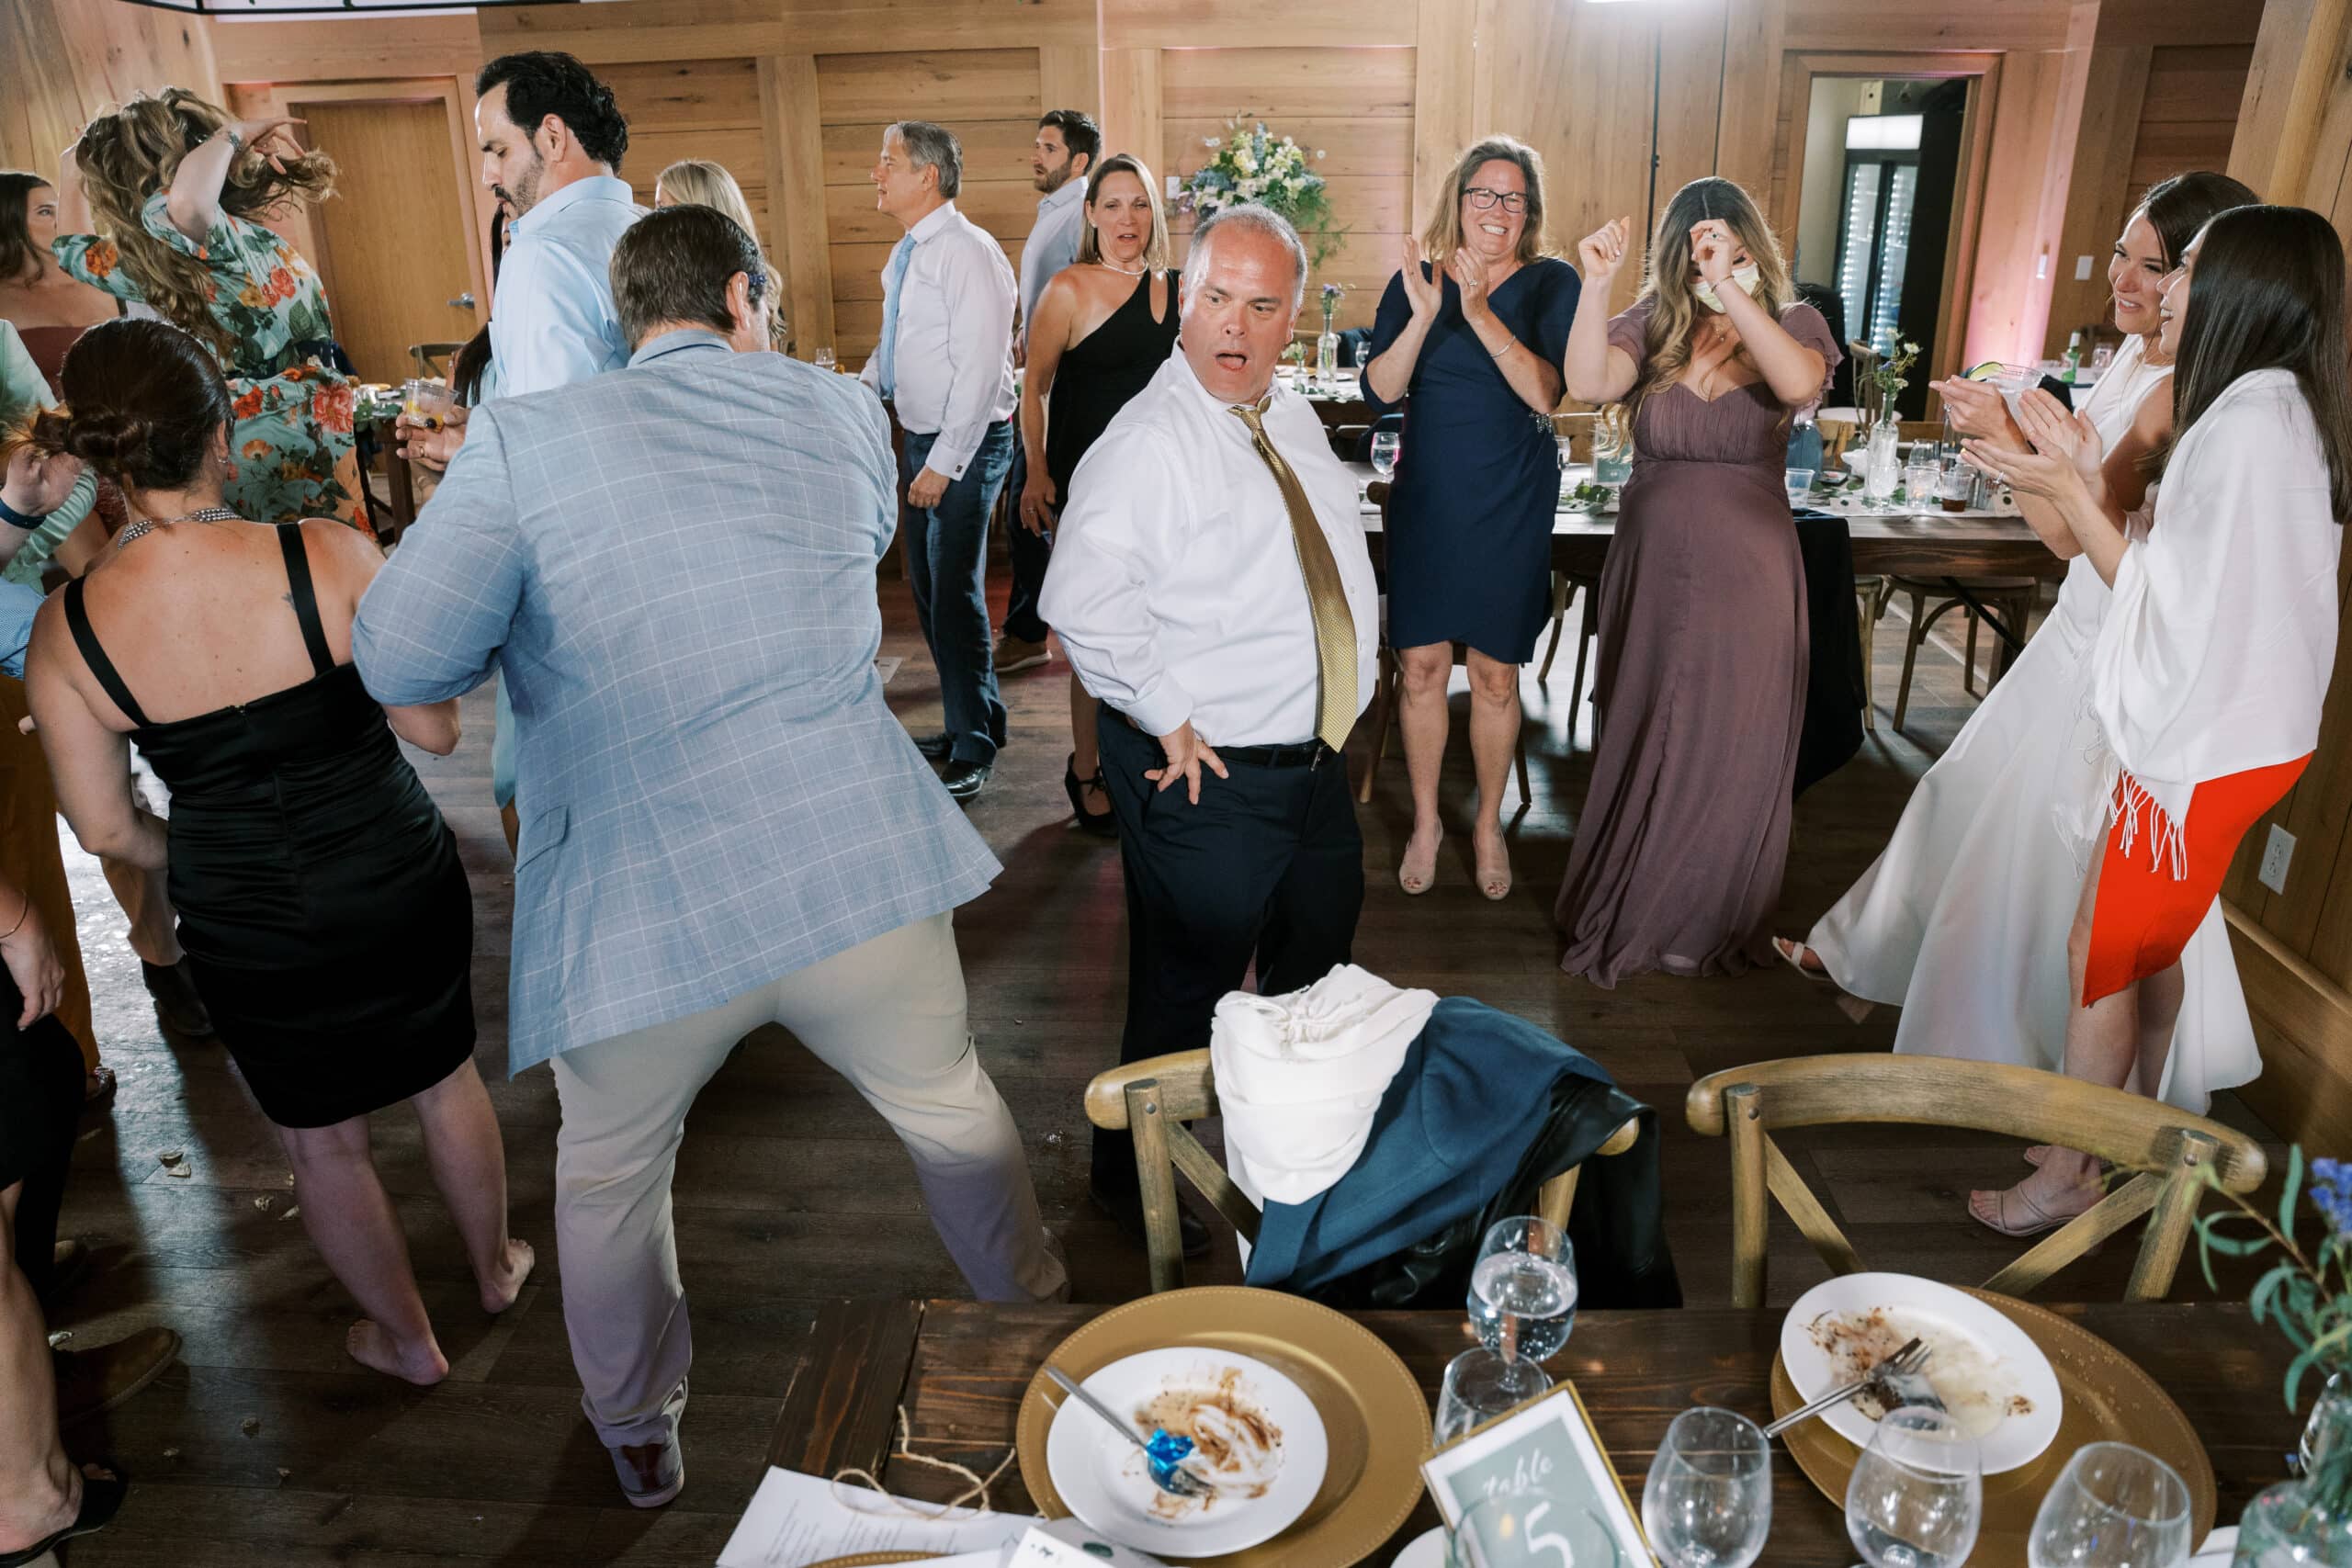 Uncle on the Dance floor